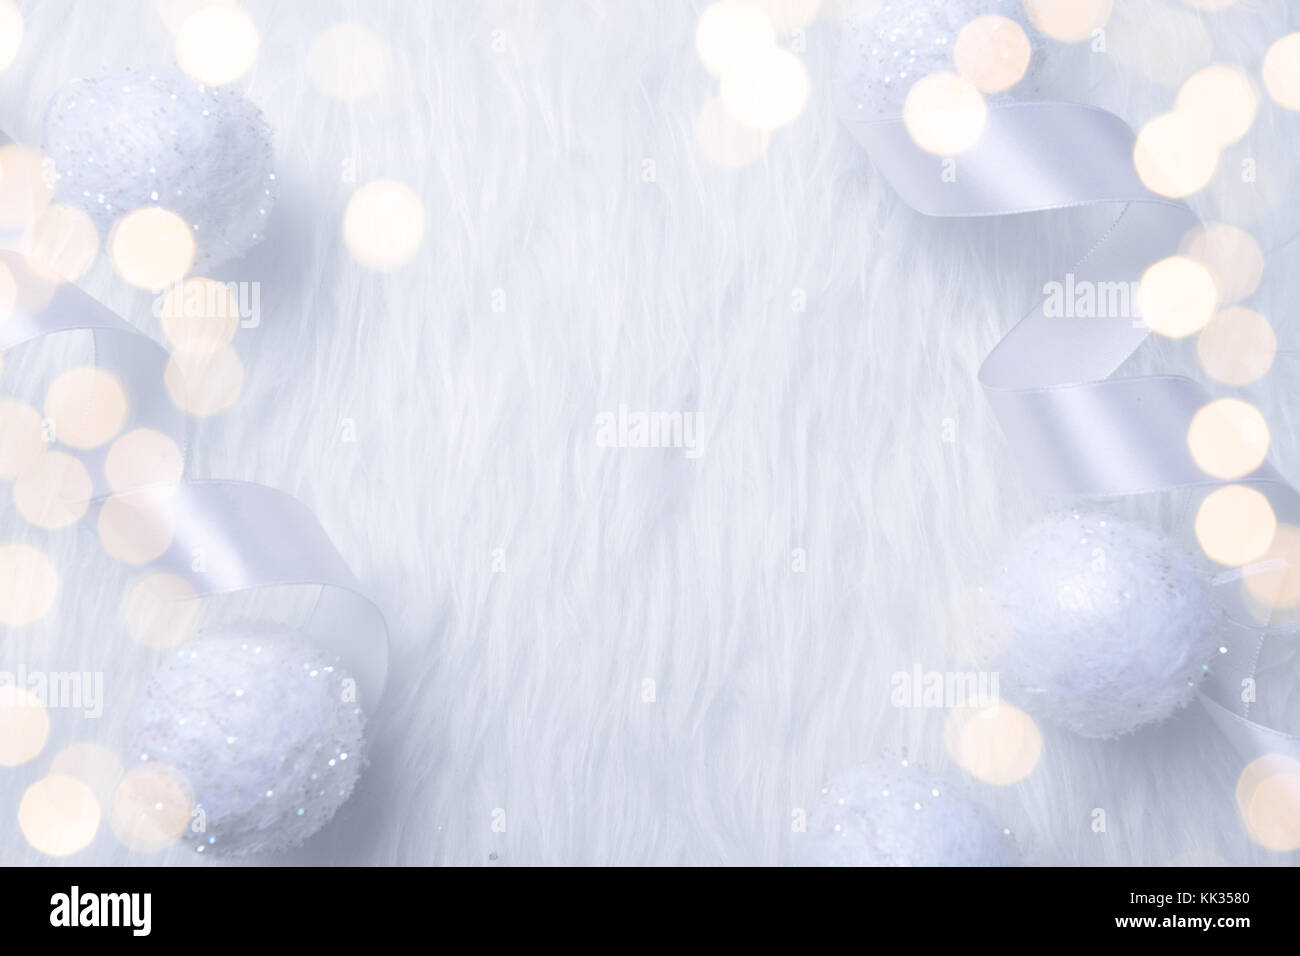 Christmas holidays composition on white fur background Stock Photo